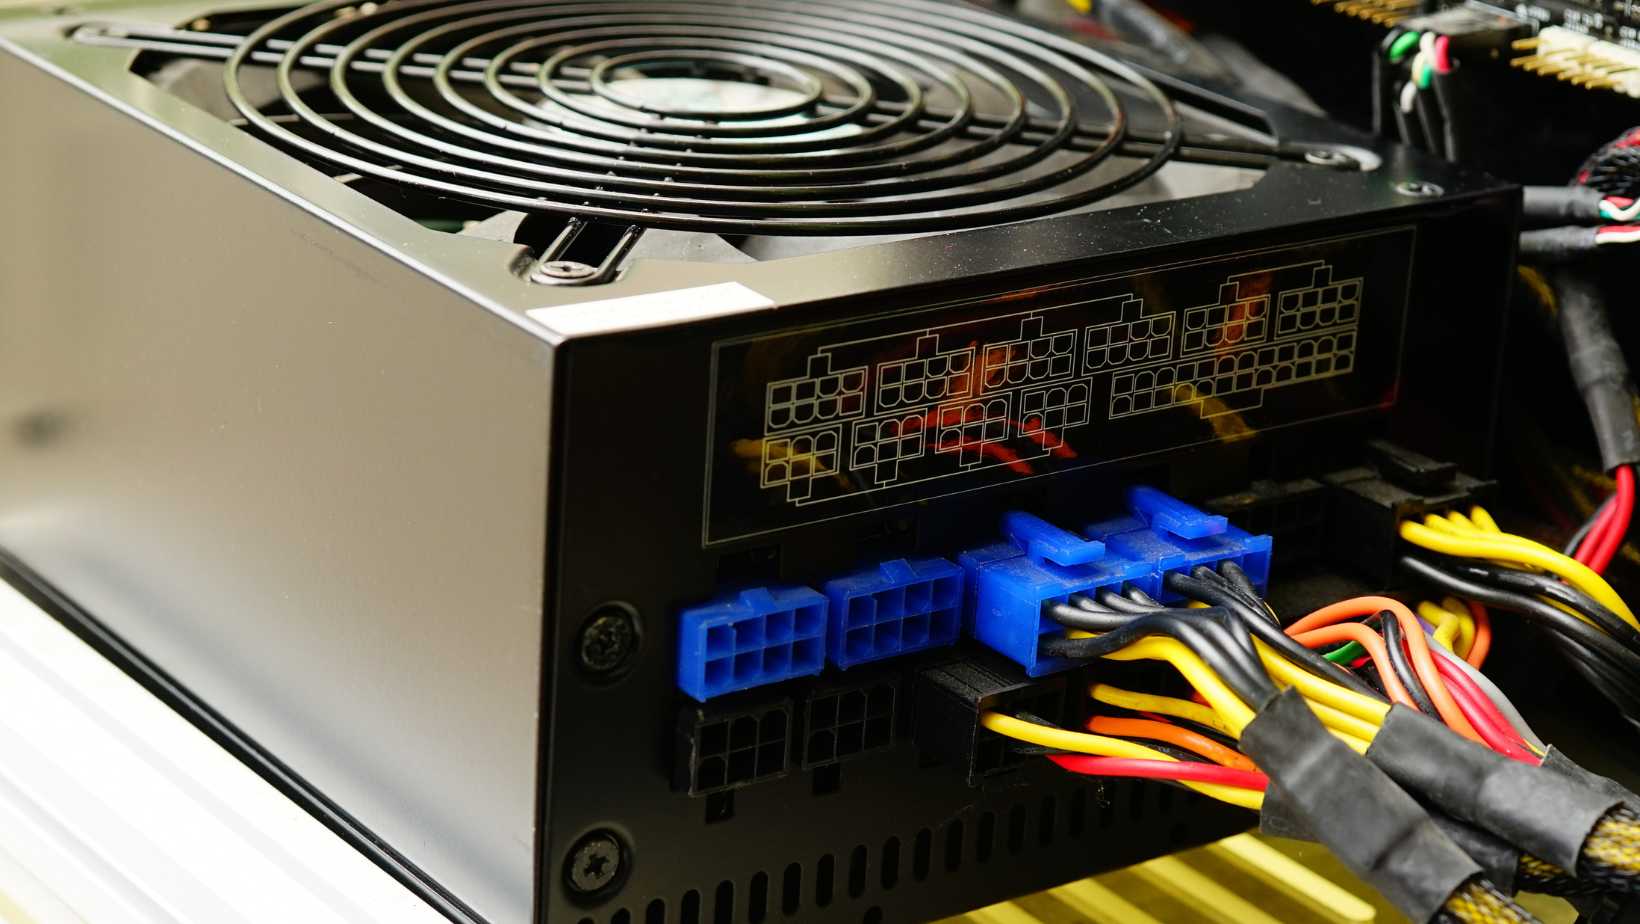 How to choose a power supply for your new gaming PC